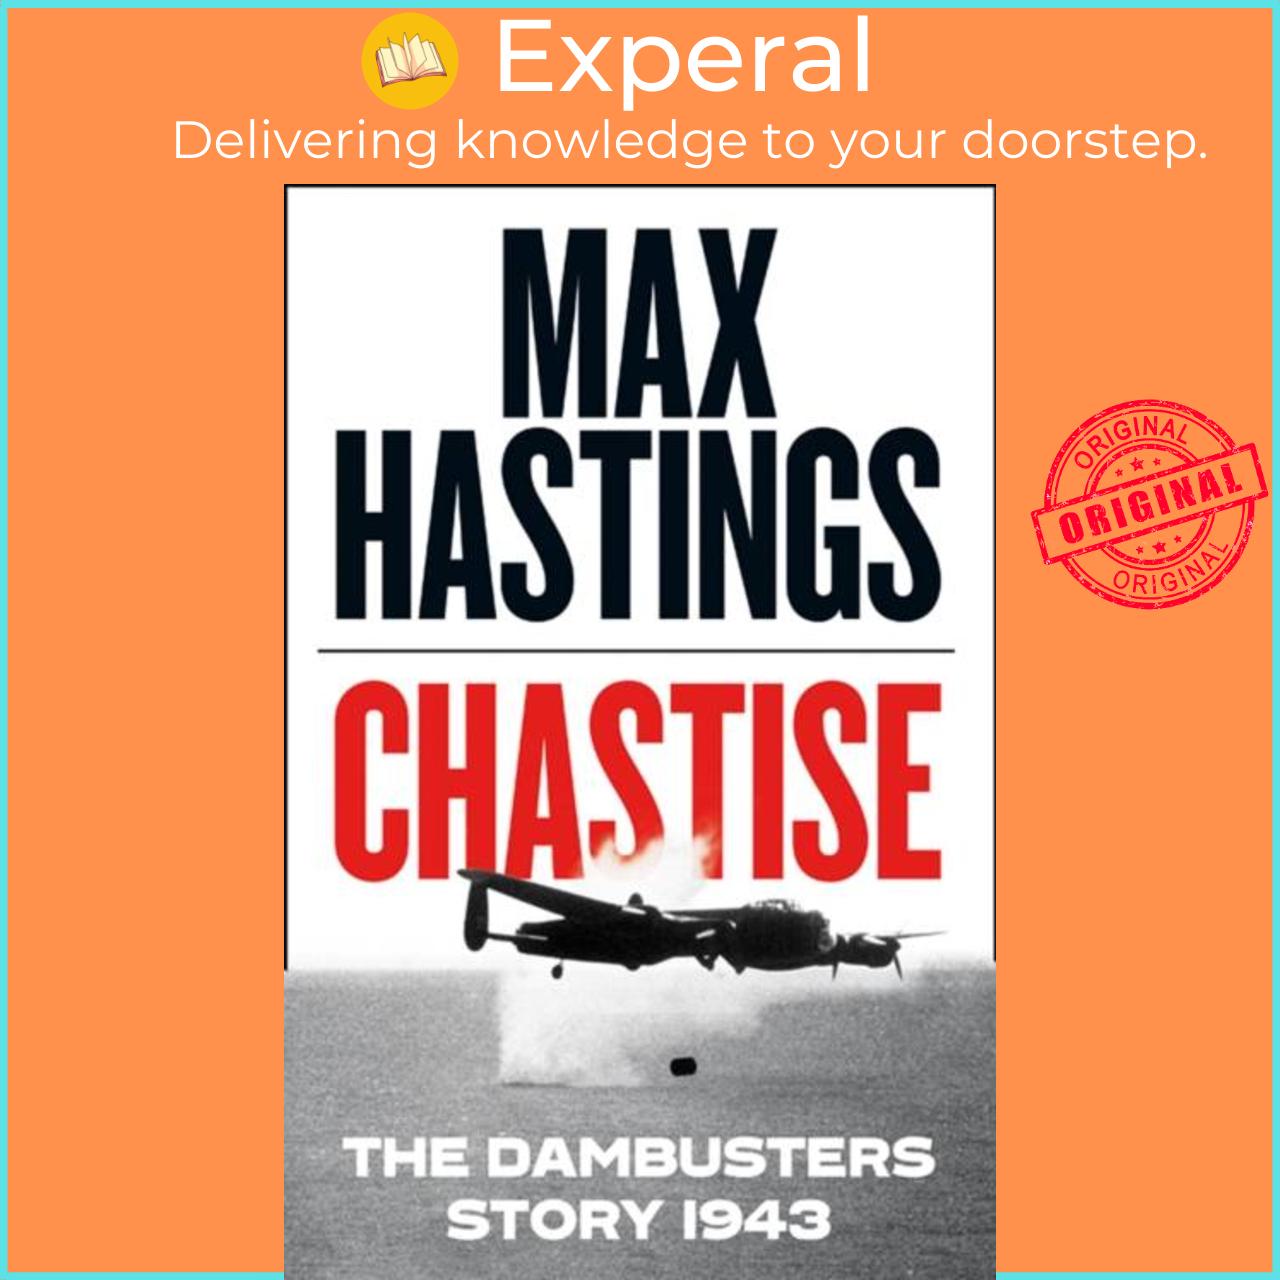 Sách - Chastise - The Dambusters Story 1943 by Max Hastings (UK edition, hardcover)